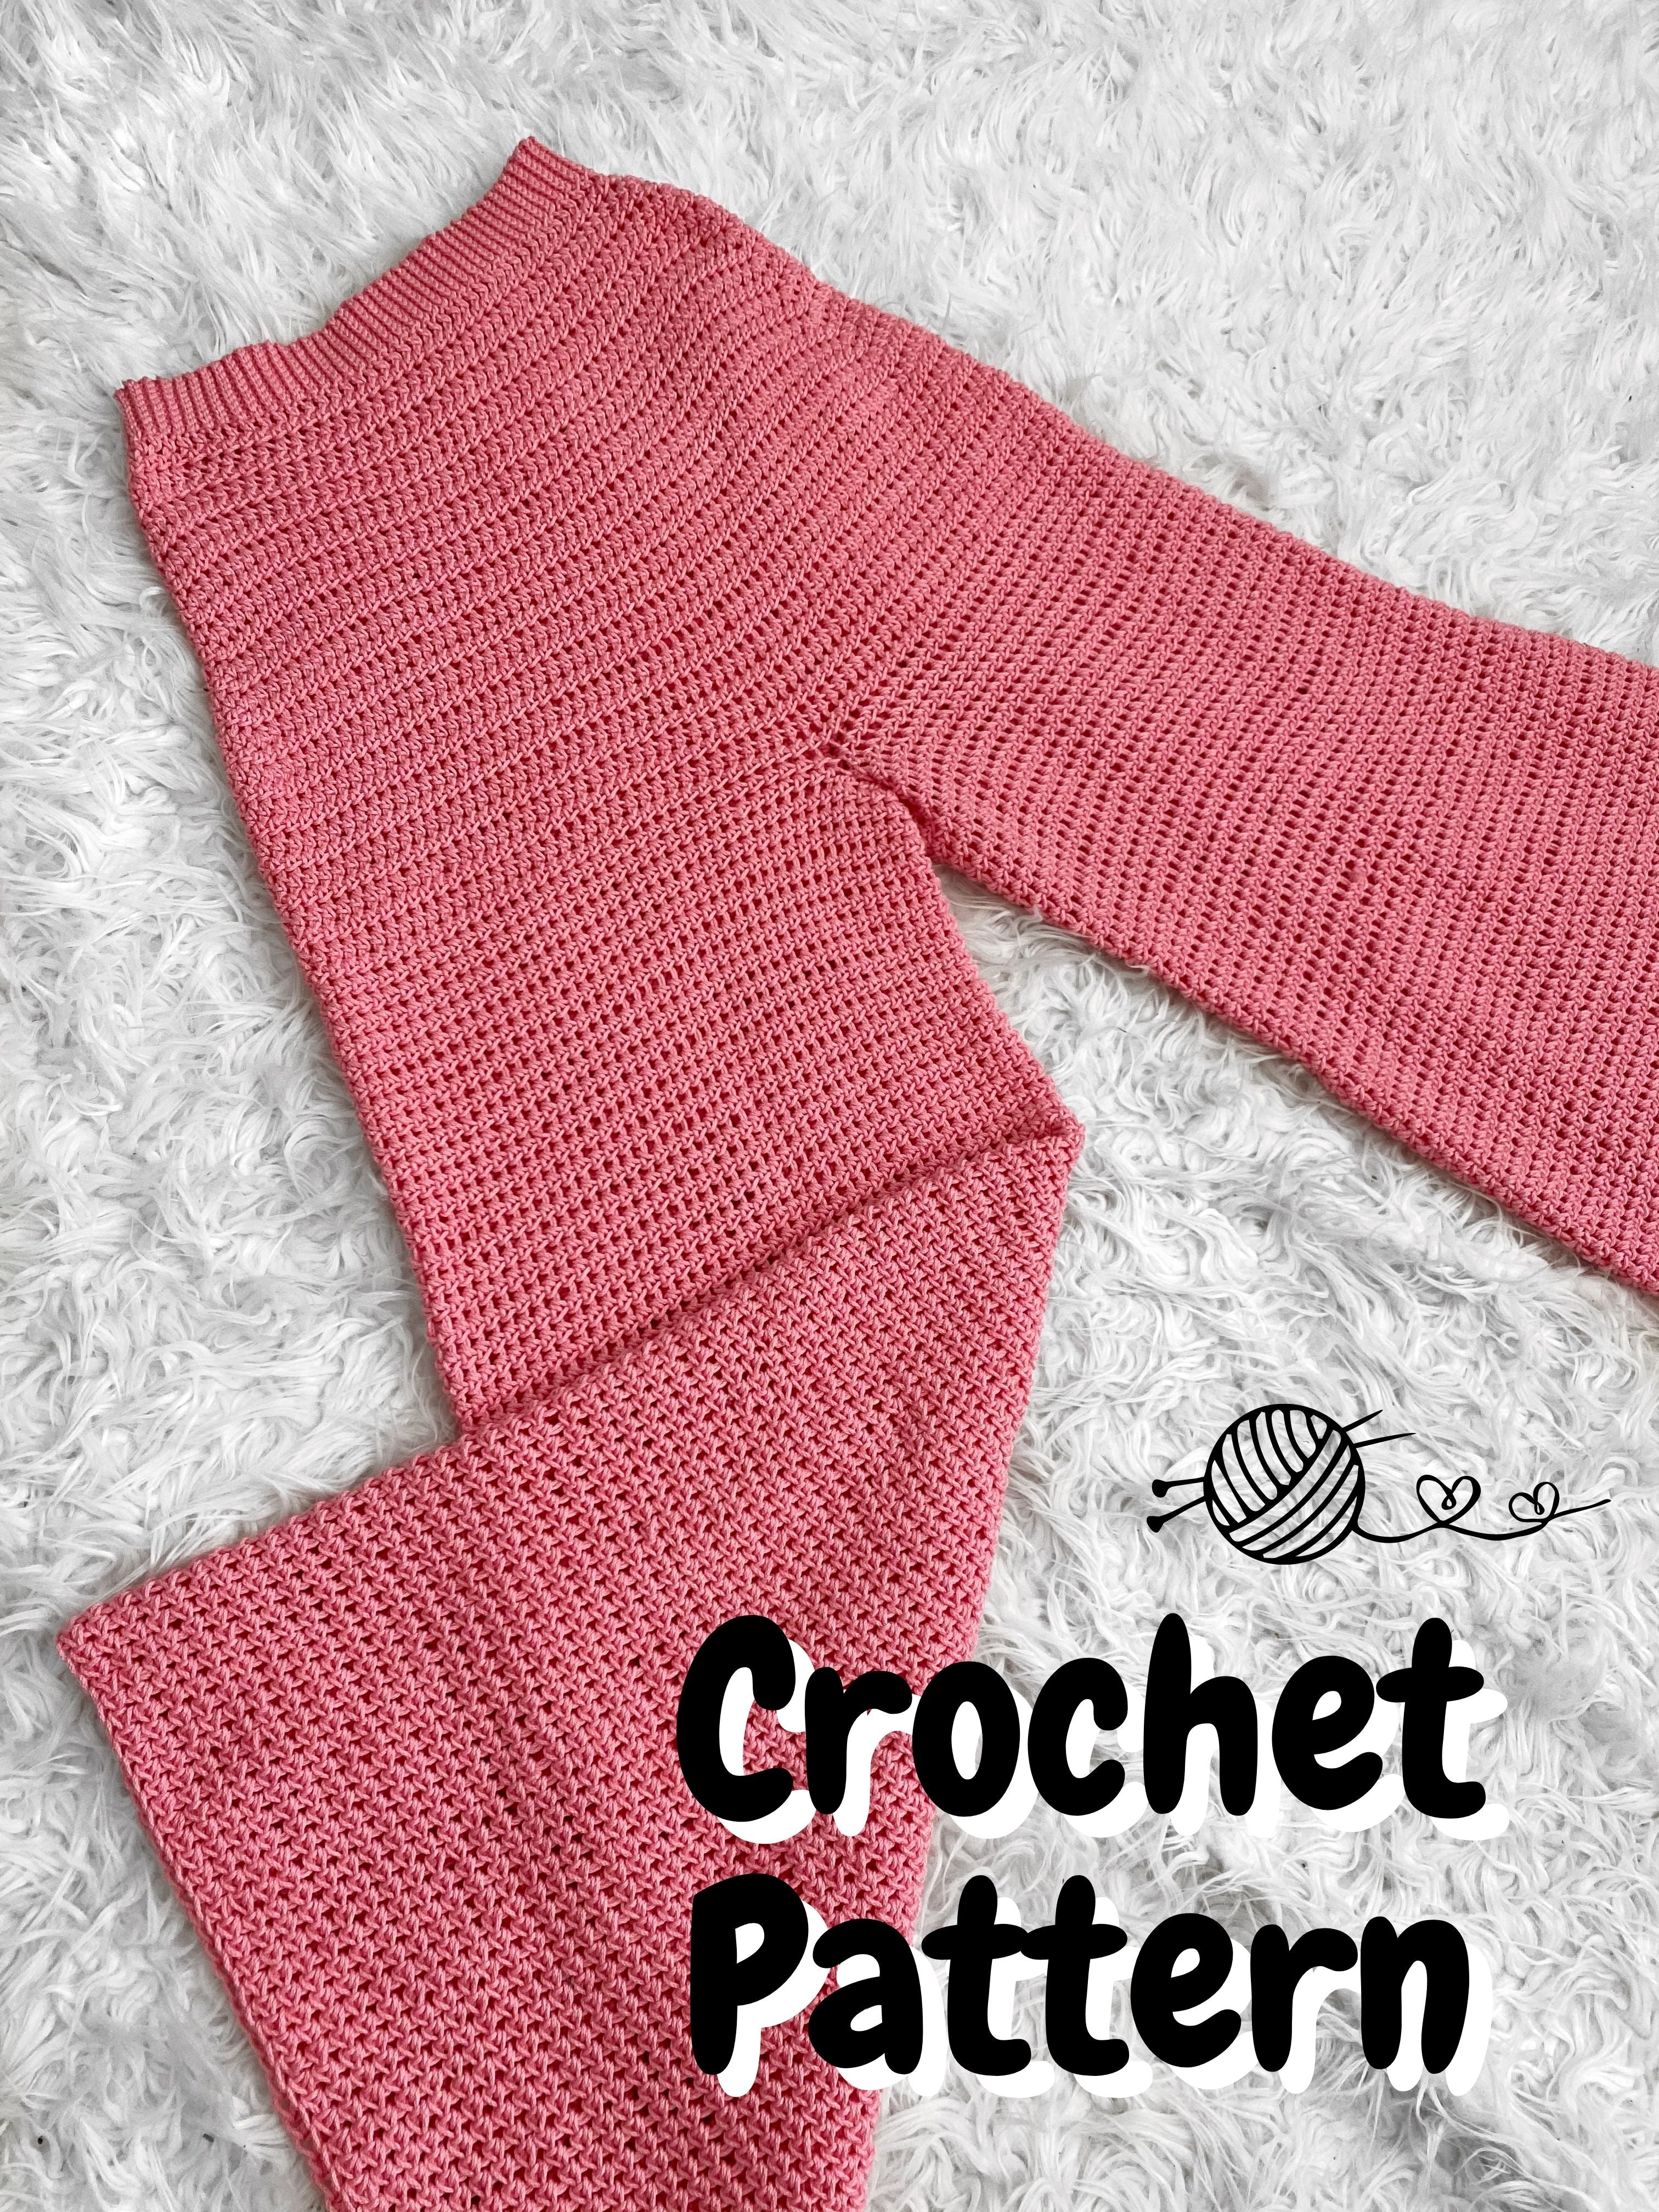 Retro Chic Baby Diaper Cover  Free Pattern  Croby Patterns